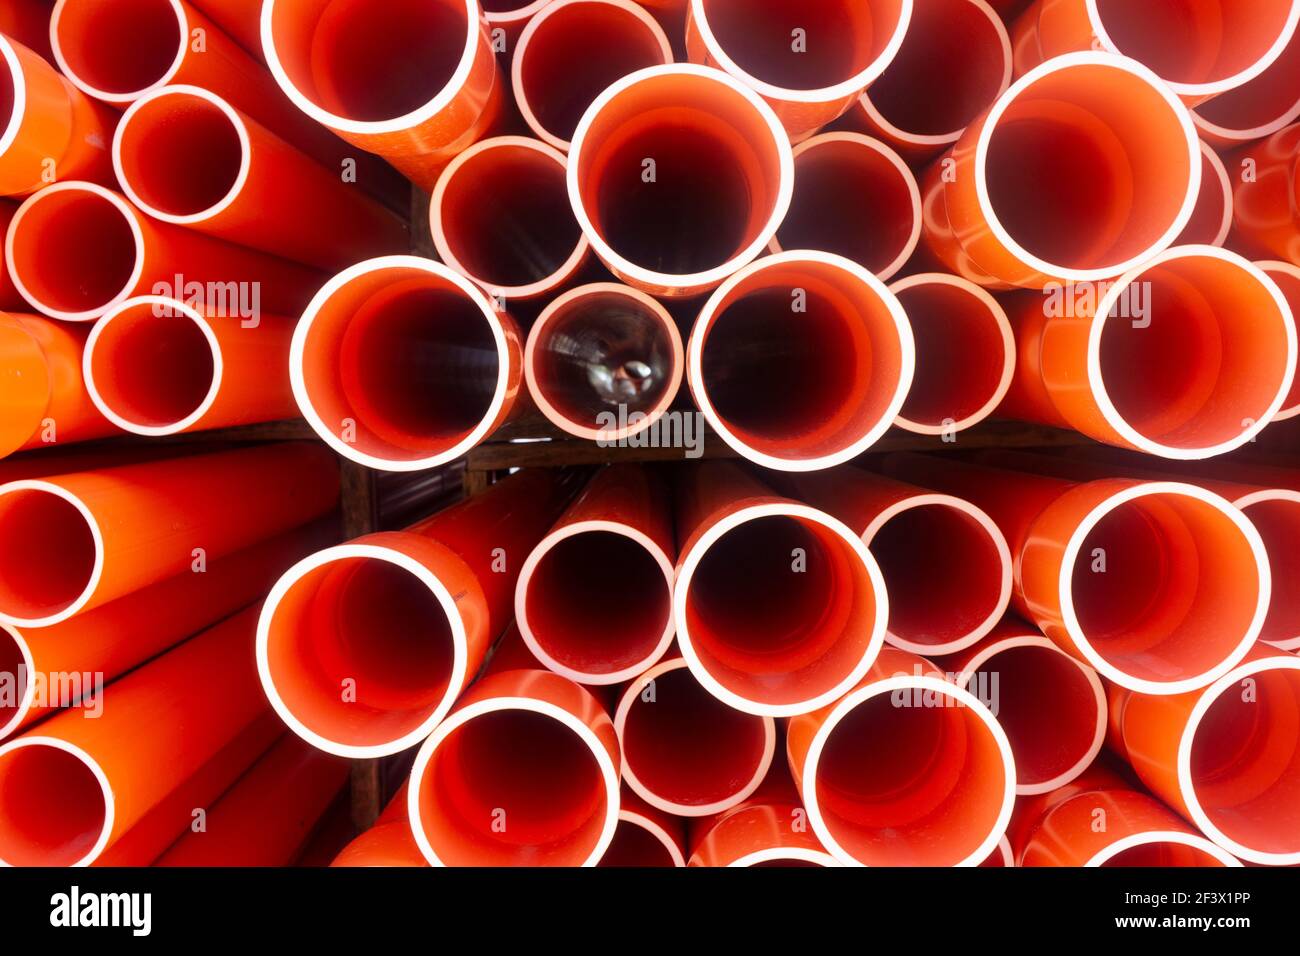 A stack of orange electrical PVC conduit pipes in rows in a warehouse end on giving a repeat pattern of circles. Stock Photo